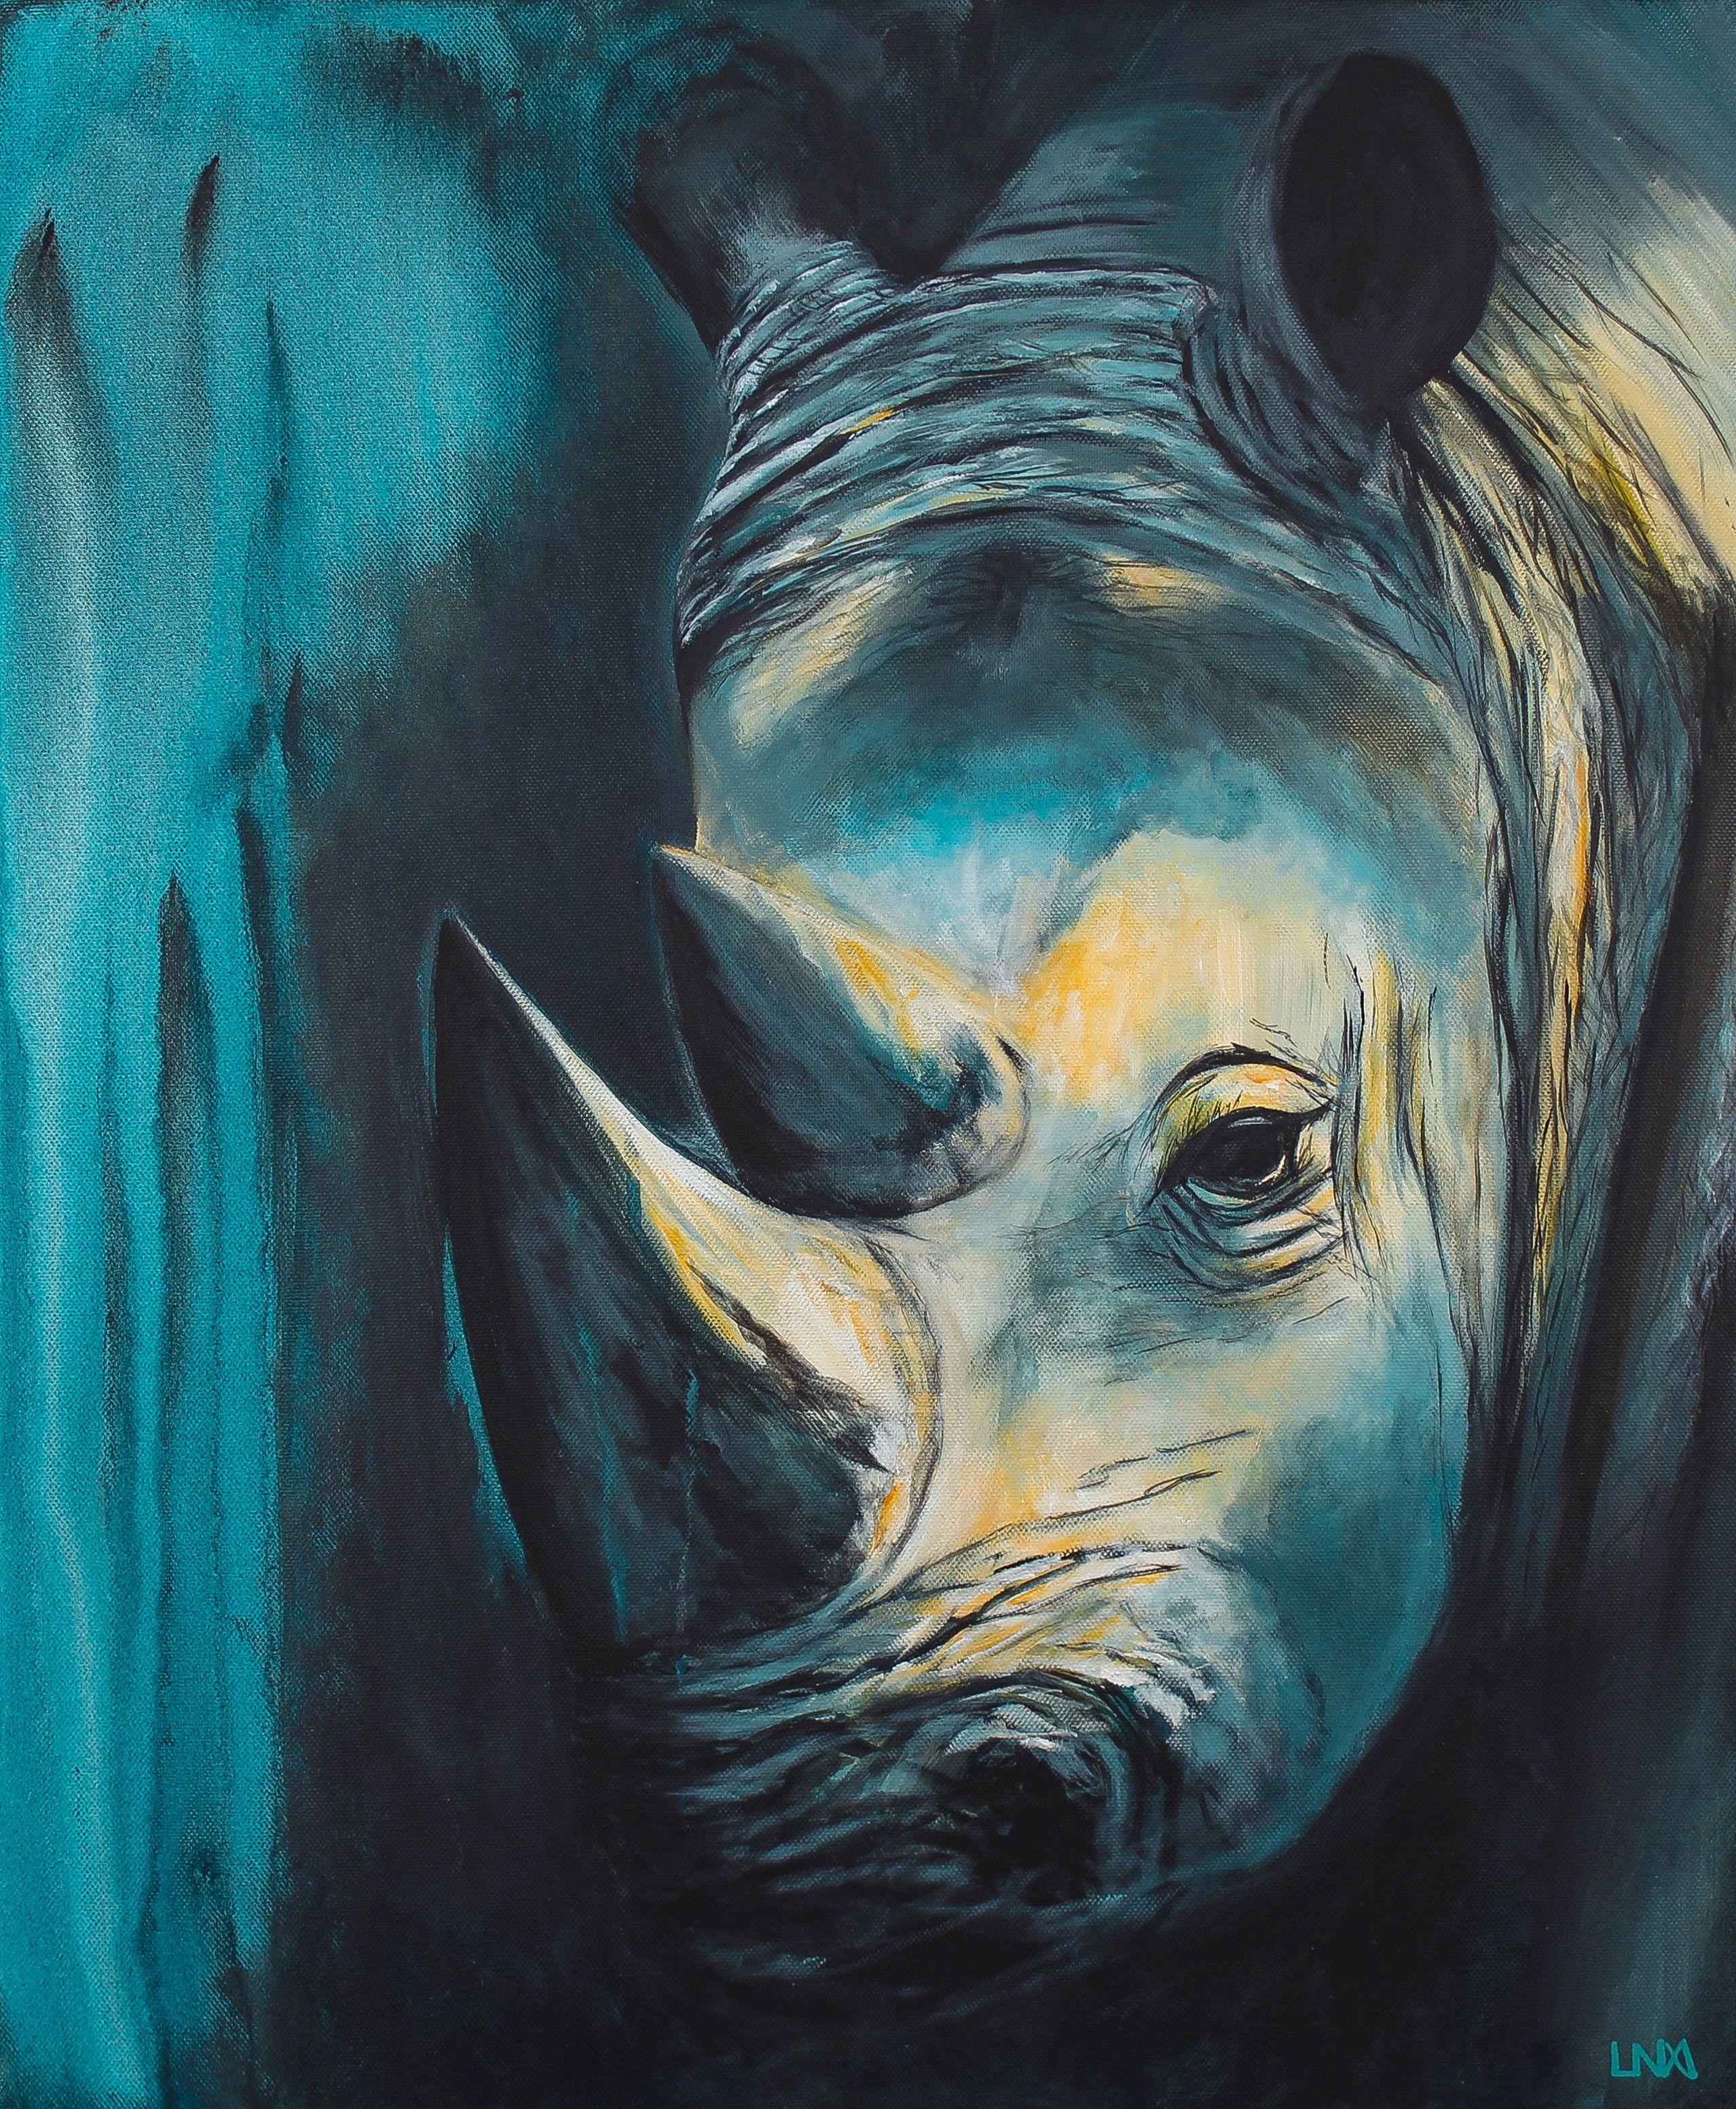 This new animal work "Us" by artist Helena Monniello depicts a rhinoceros. It is made with blue and yellow colors. This painting represents us, that's why she named it "Us". We, that is to say all the living beings in the world. We are at the same